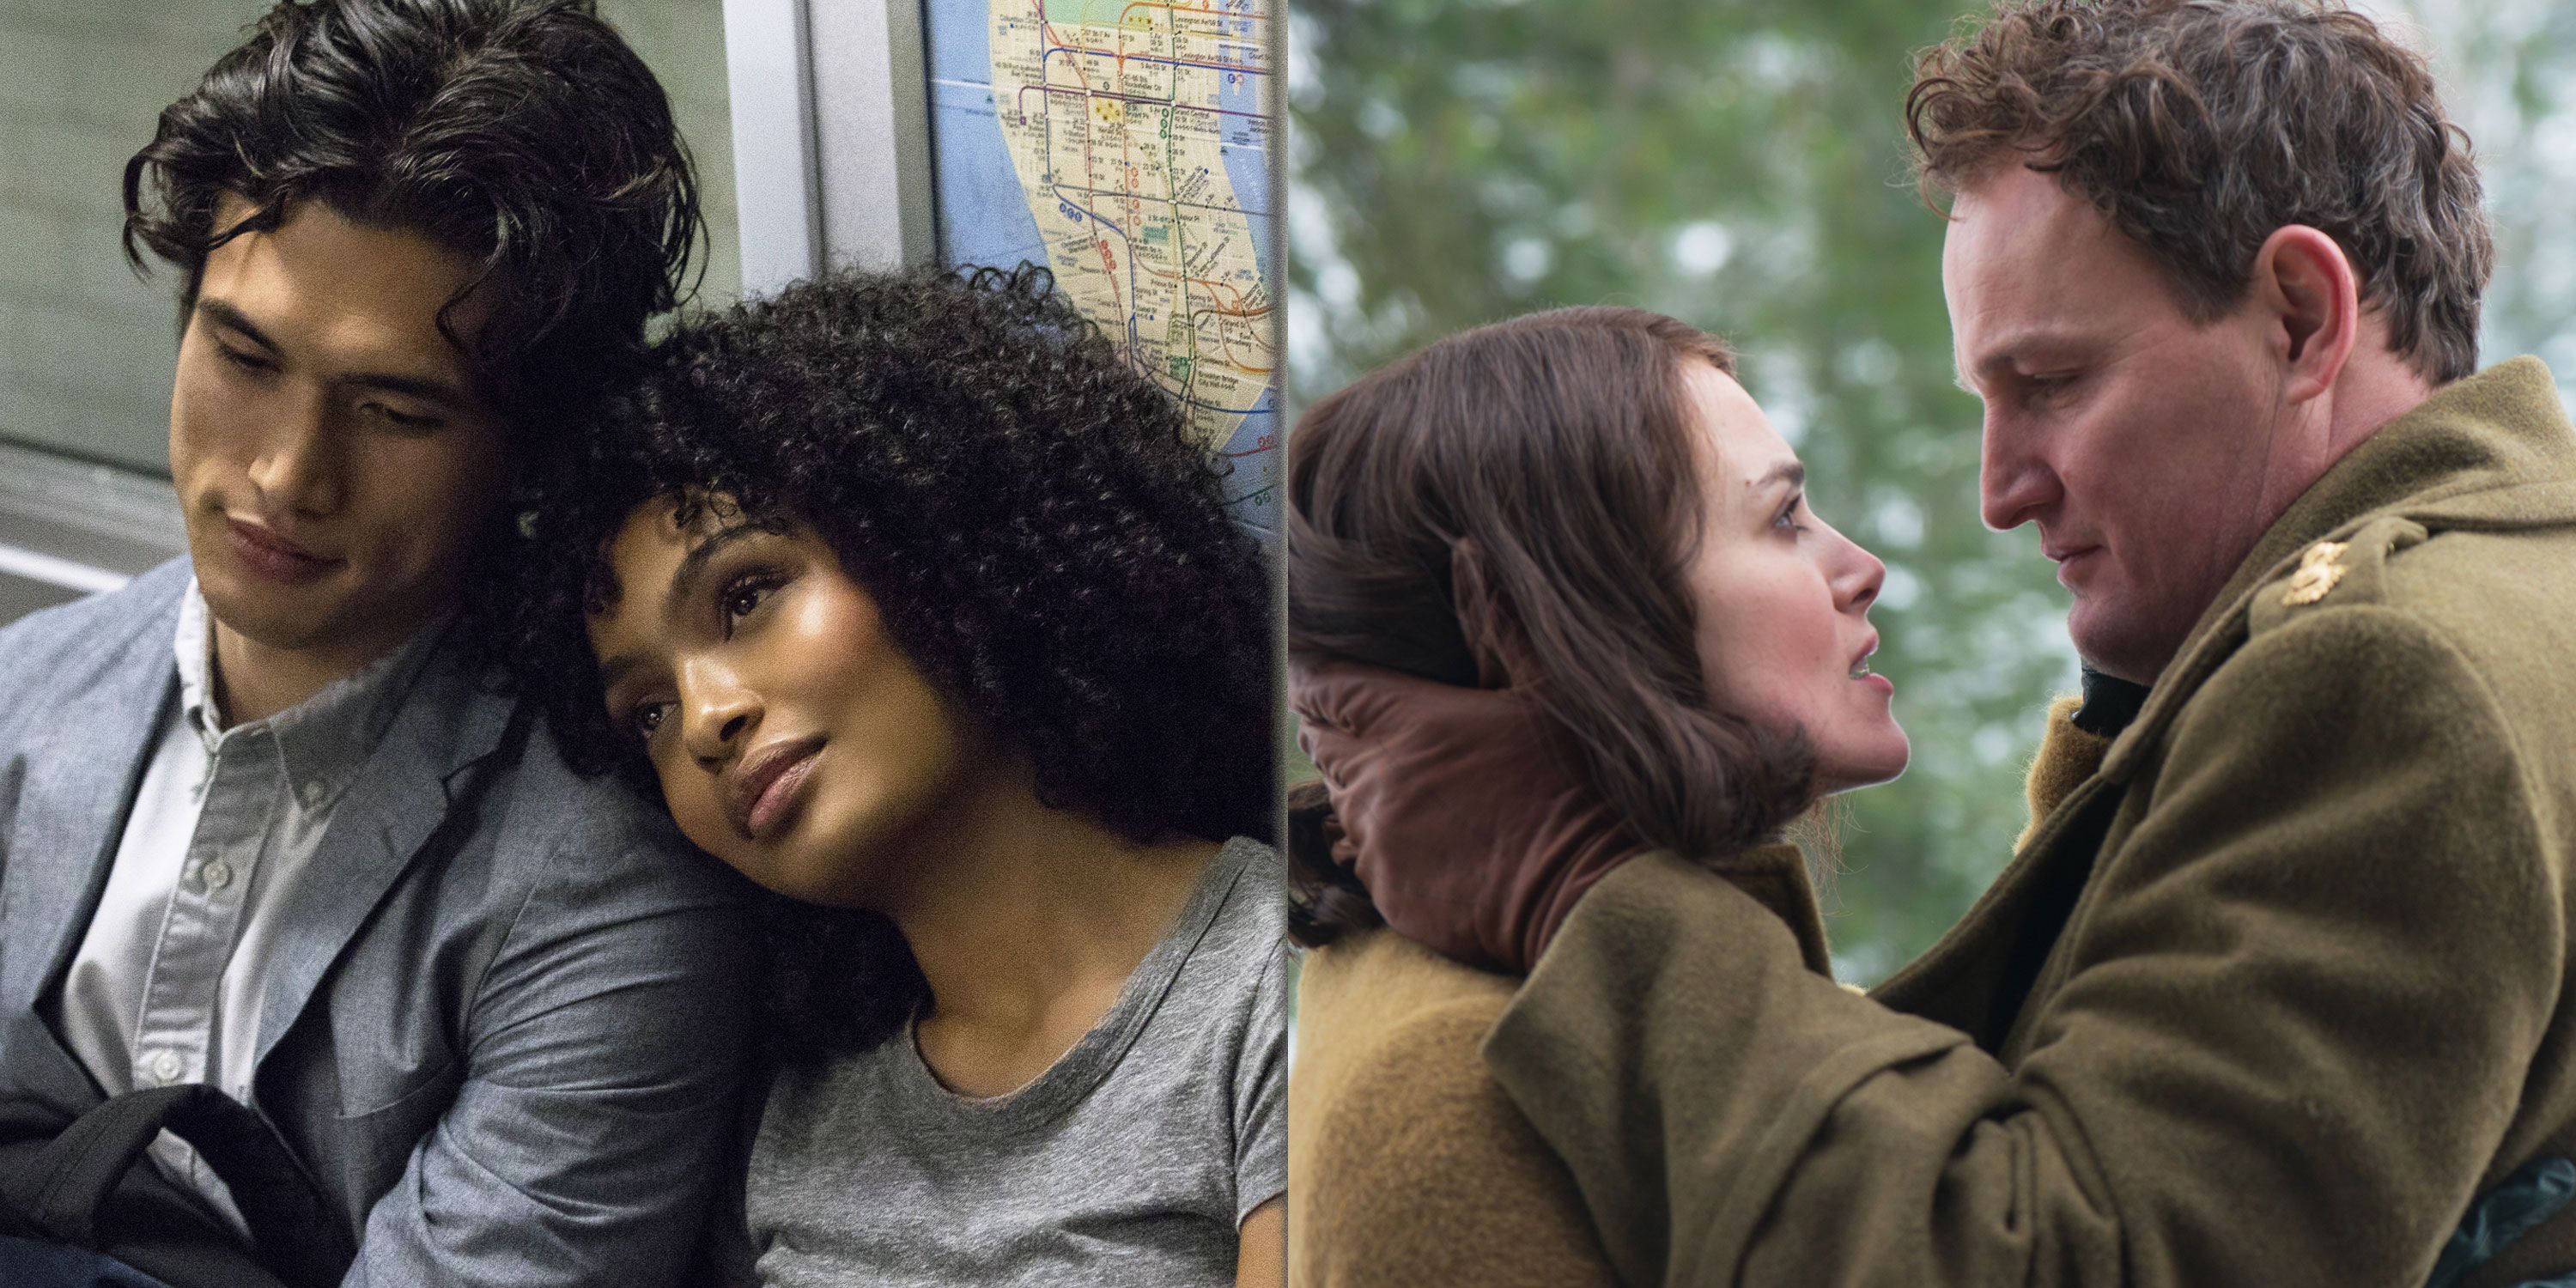 18 Best Romantic Movies 2019 - Most Anticipated Love Story Movies